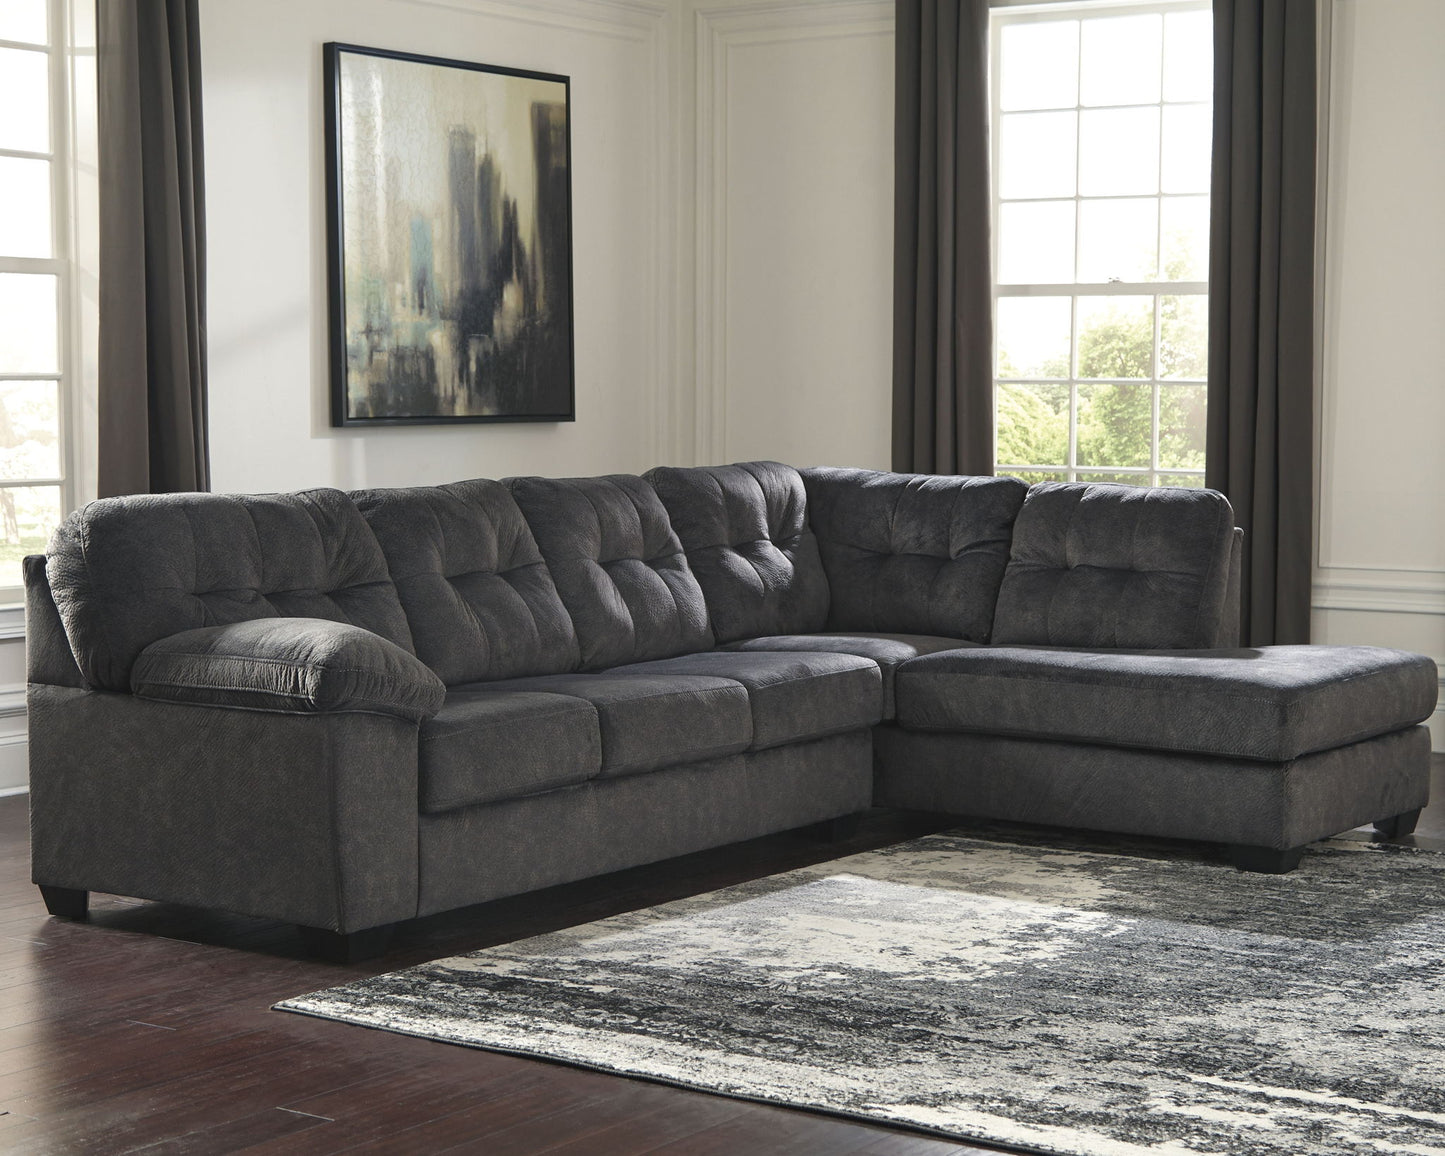 Accrington - Granite - Right Arm Facing Corner Chaise With Sleeper 2 Pc Sectional